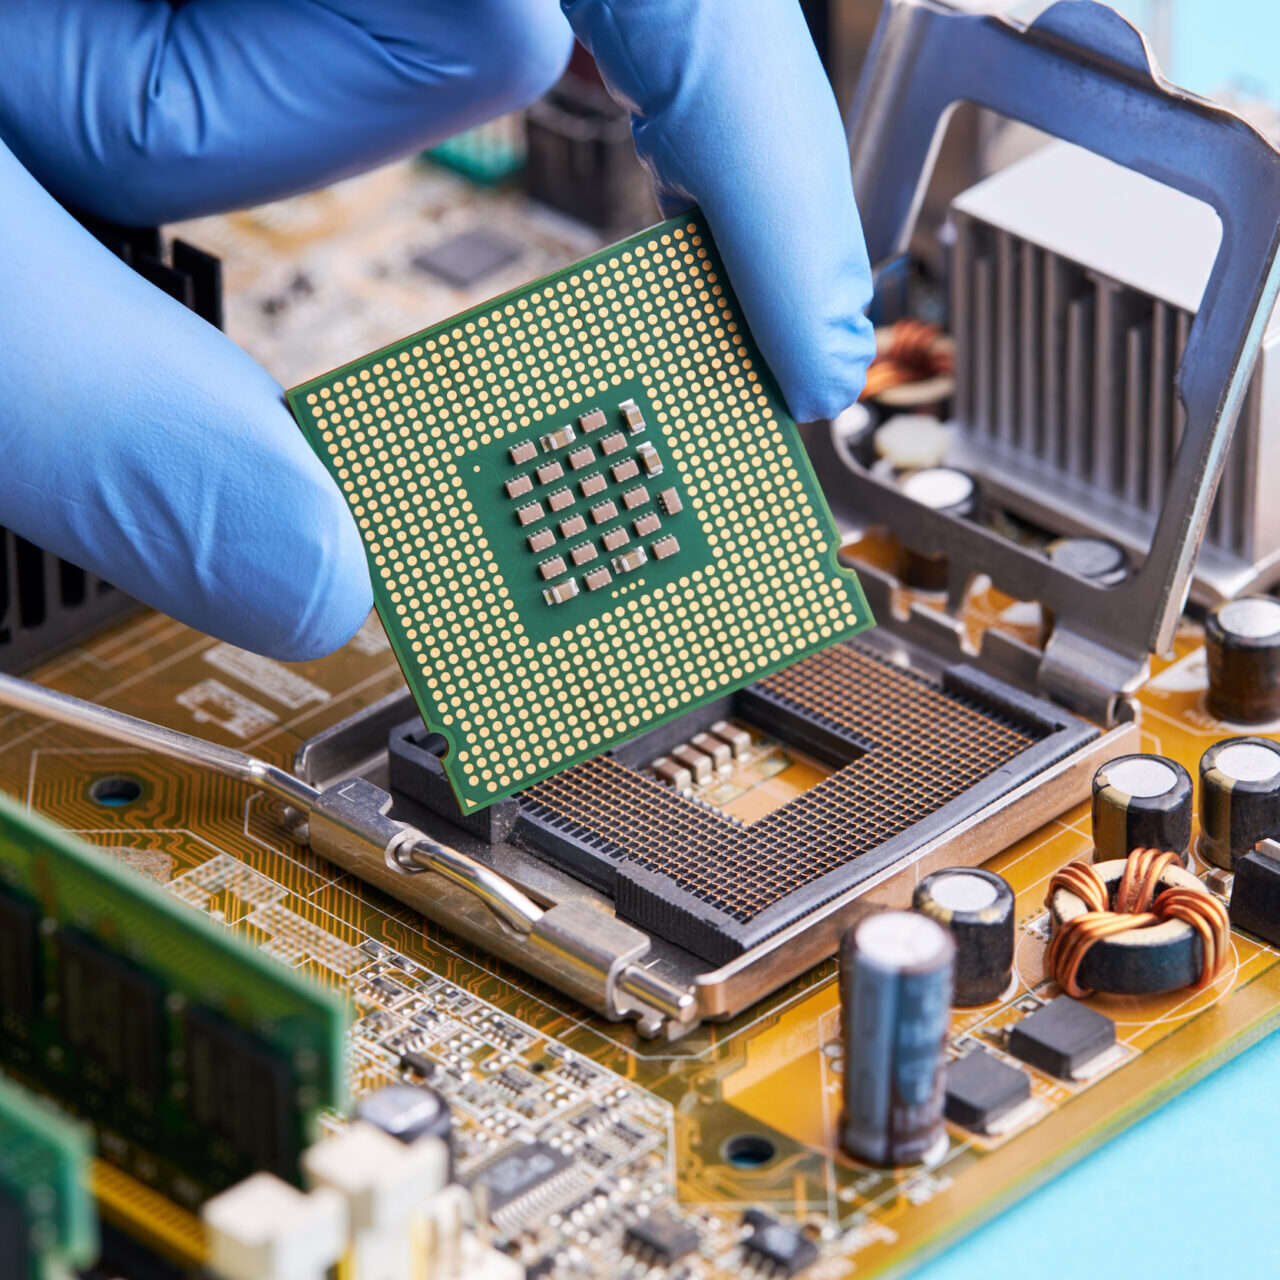 computer hardware service concept. technician repairing desktop pc or laptop circuit board. person install cpu chip to pcb socket.; Shutterstock ID 1819204742; purchase_order: -; job: -; client: -; other: -